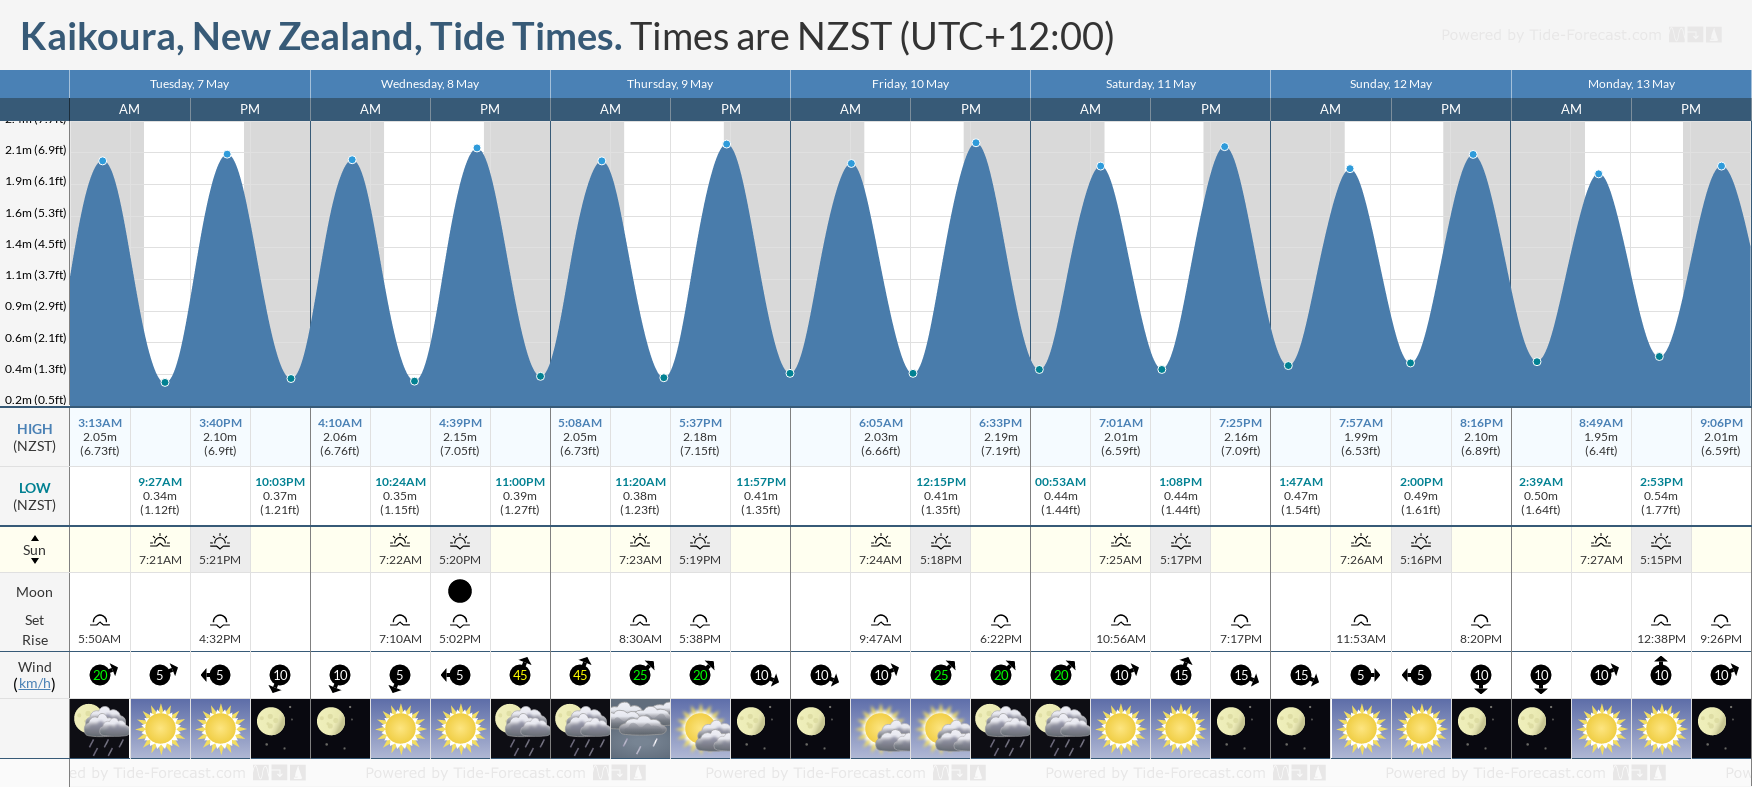 Kaikoura, New Zealand Tide Chart including high and low tide tide times for the next 7 days